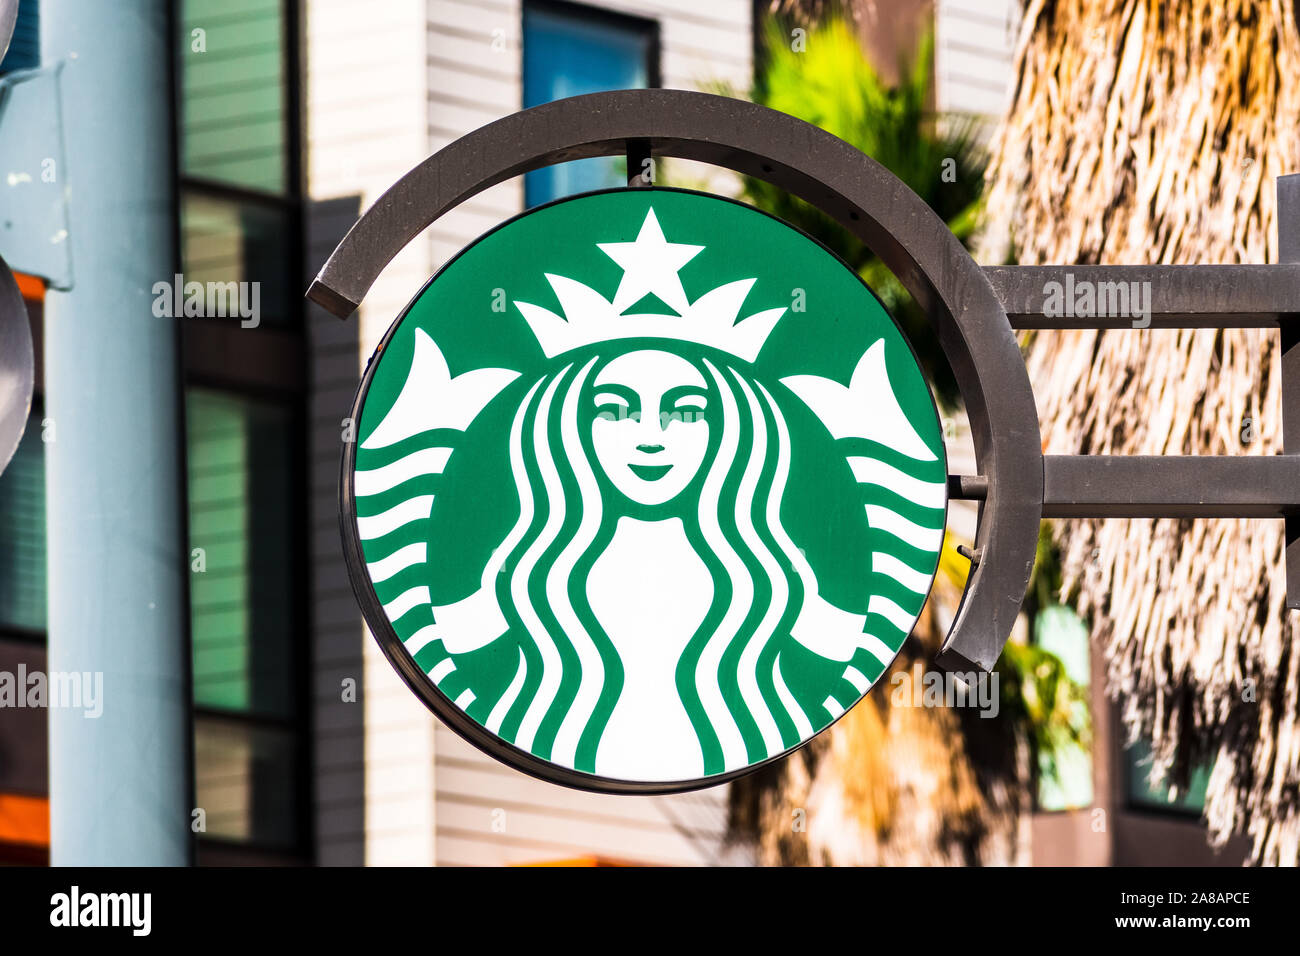 Nov 2, 2019 San Francisco / CA / USA - Starbucks logo at the entrance to a cafe located in Mission Bay District Stock Photo